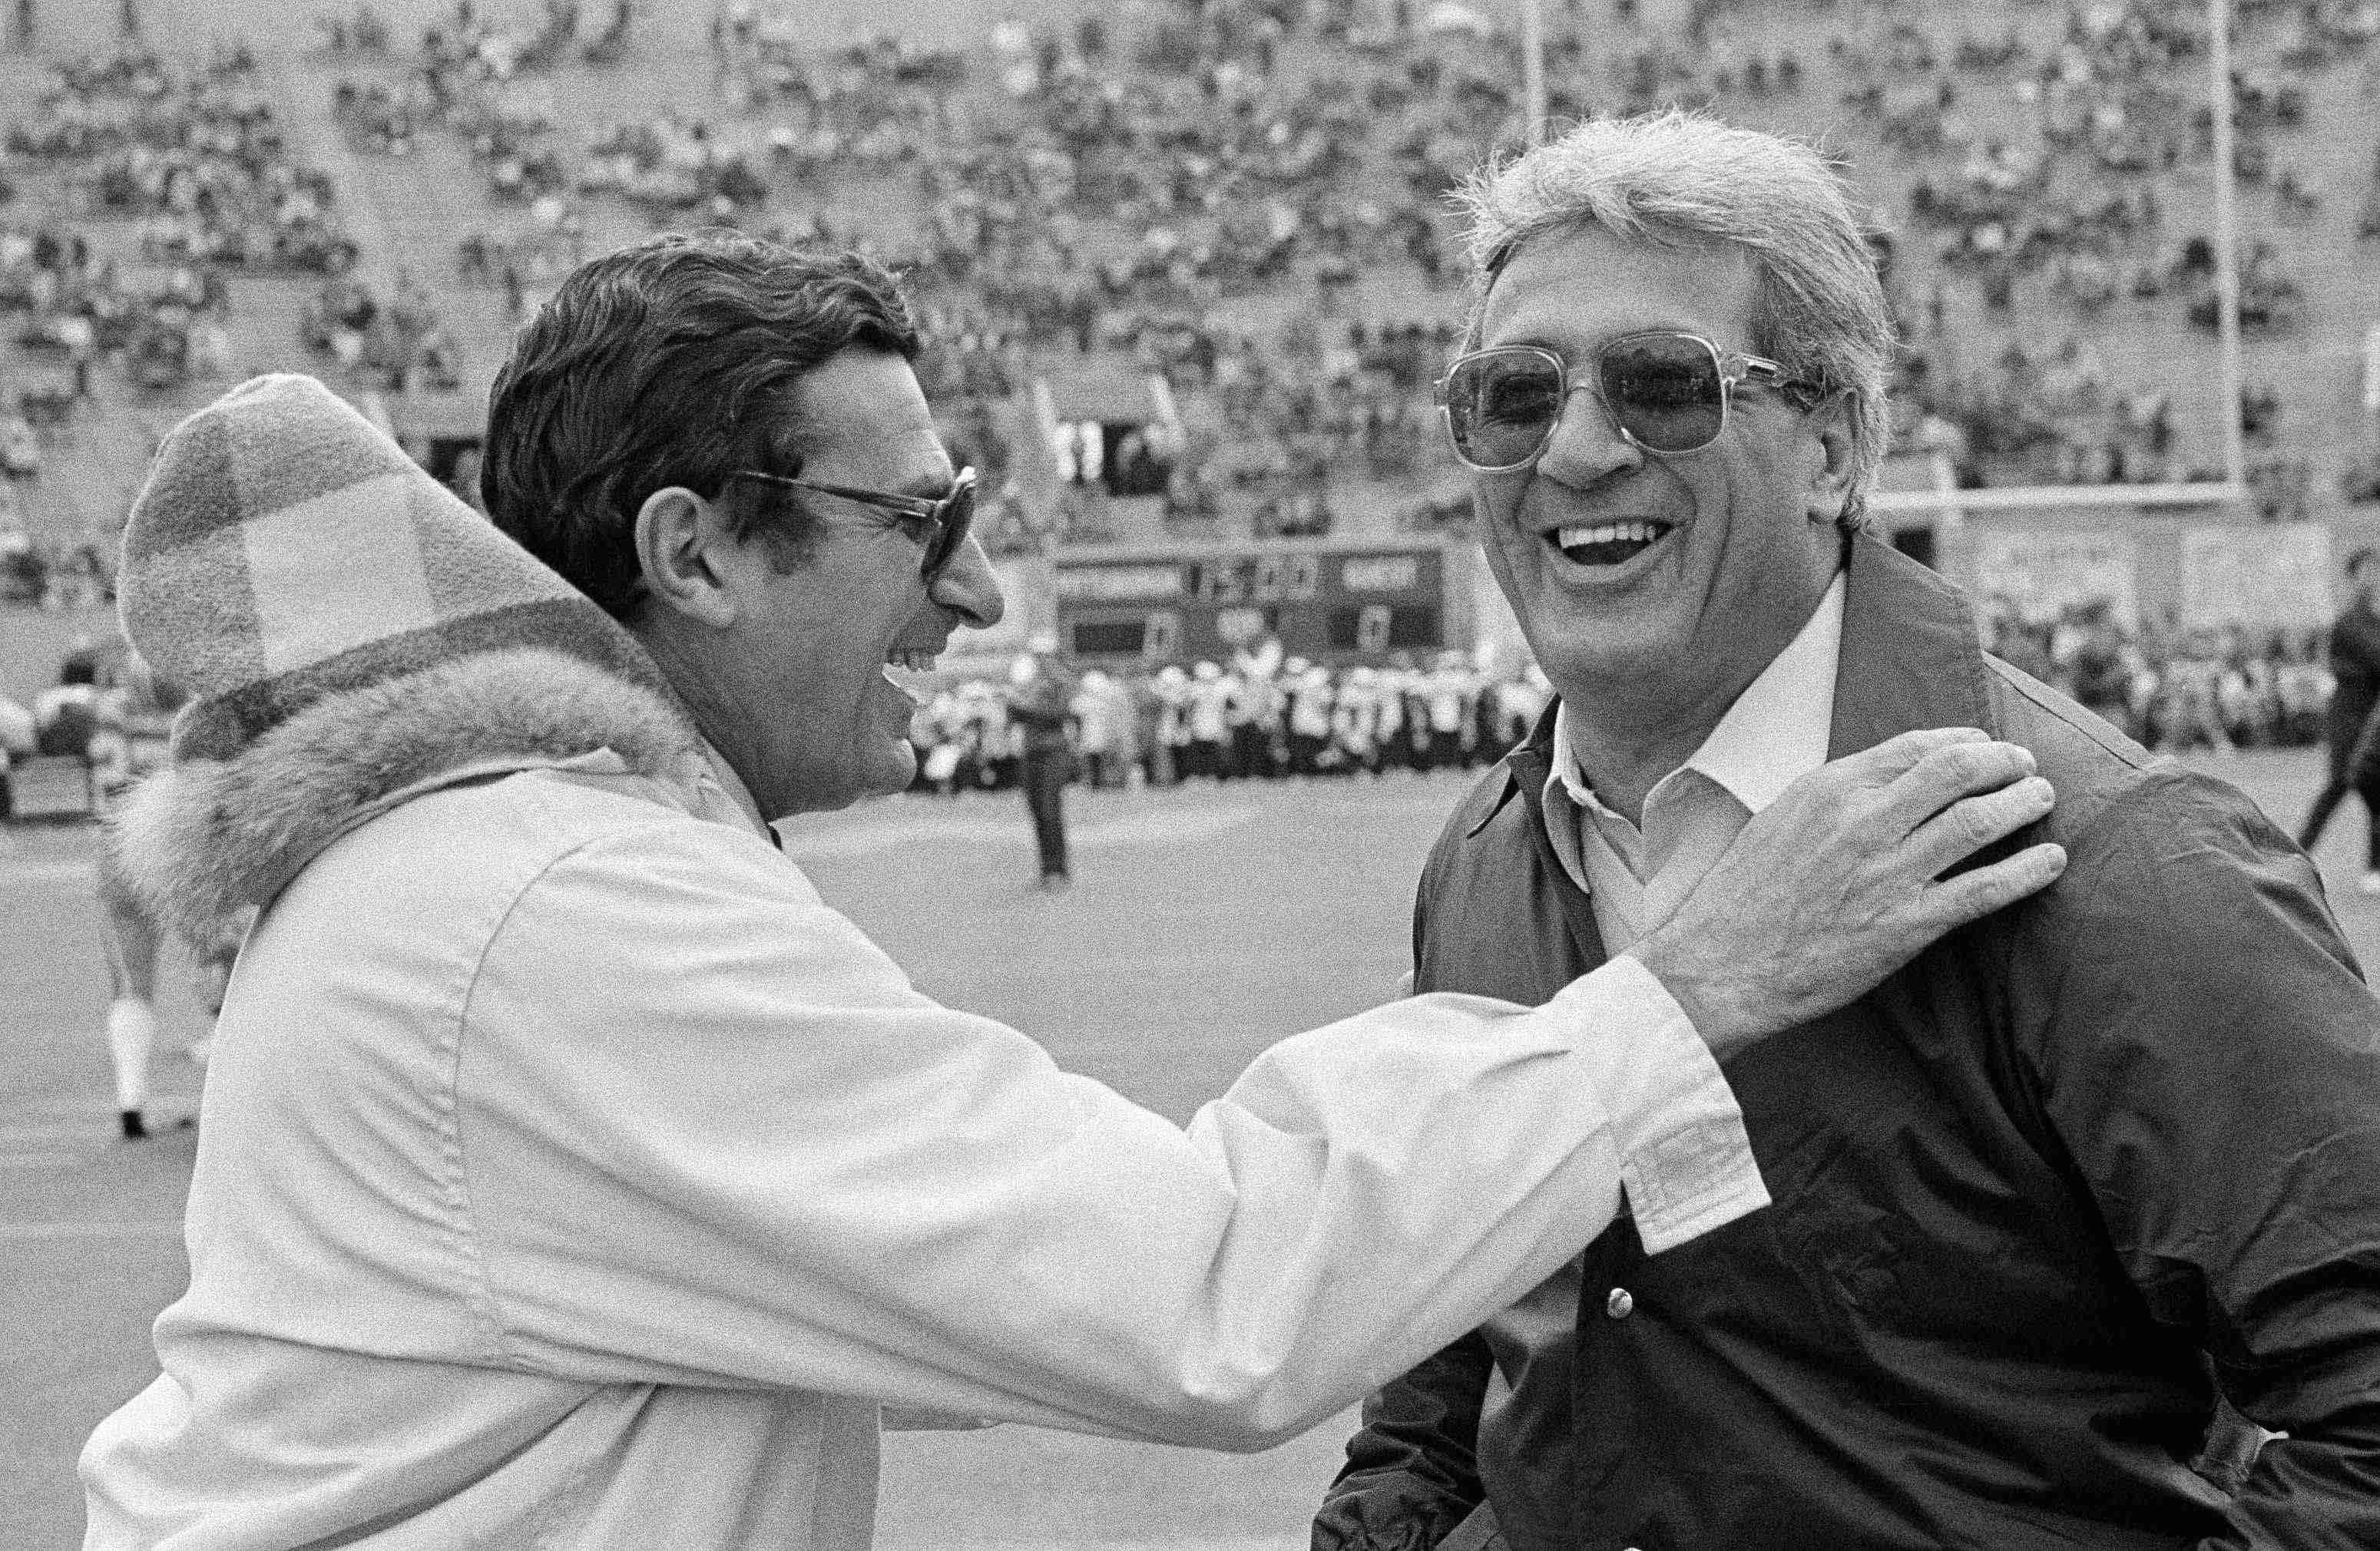 In this Nov. 19, 1983, file photo, Penn State coach, Joe Paterno, left, and Pittsburgh coach Foge Fazio talk before a college football game in Pittsburgh. Fazio, who succeeded Jackie Sherrill ascoach at alma mater Pittsburgh and later was a defensive coordinator for the NFL's Vikings and Browns, died Wednesday night, Dec. 2, 2009, following a lengthy battle with leukemia. He was 71. (AP Photo/Gene J. Puskar, File)